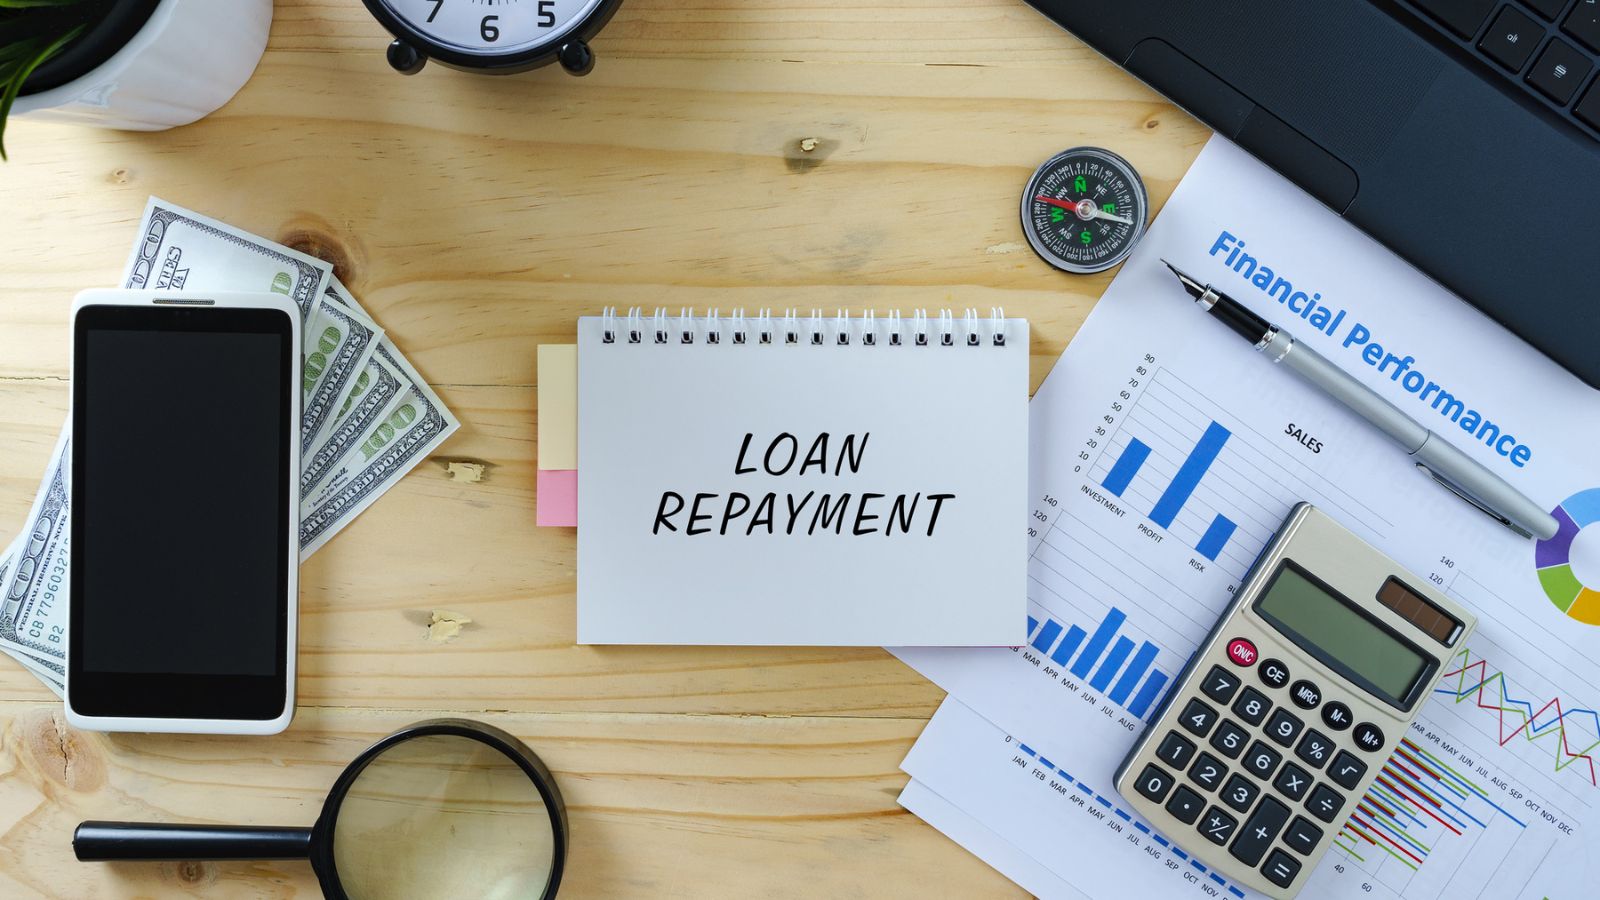 10 Common Student Loan Repayment Concerns